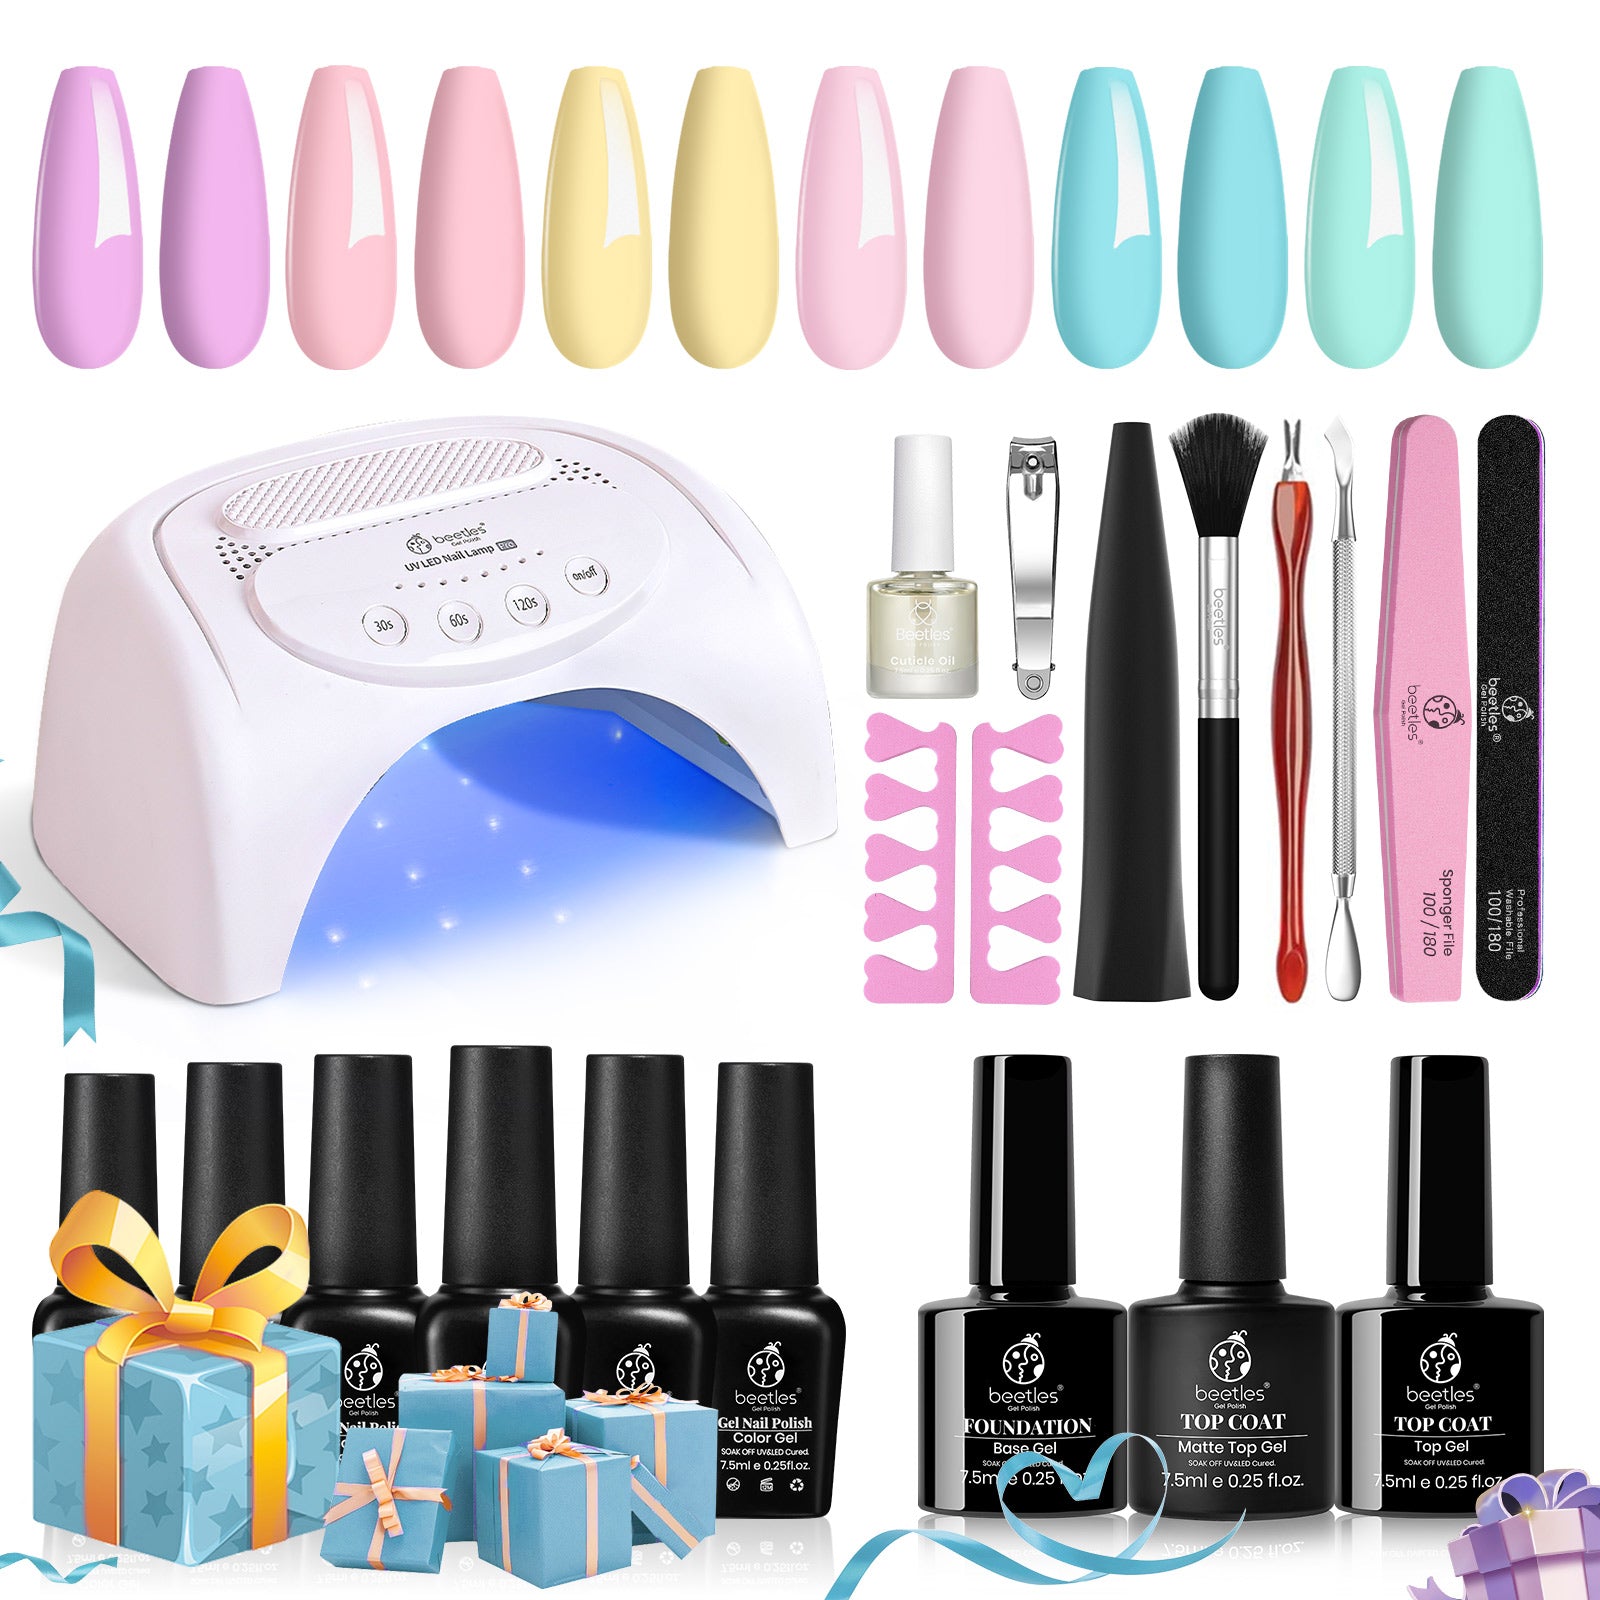 All-in-one Nail Starter Kit Gel Manicure Gift Box with 6 Shades#019